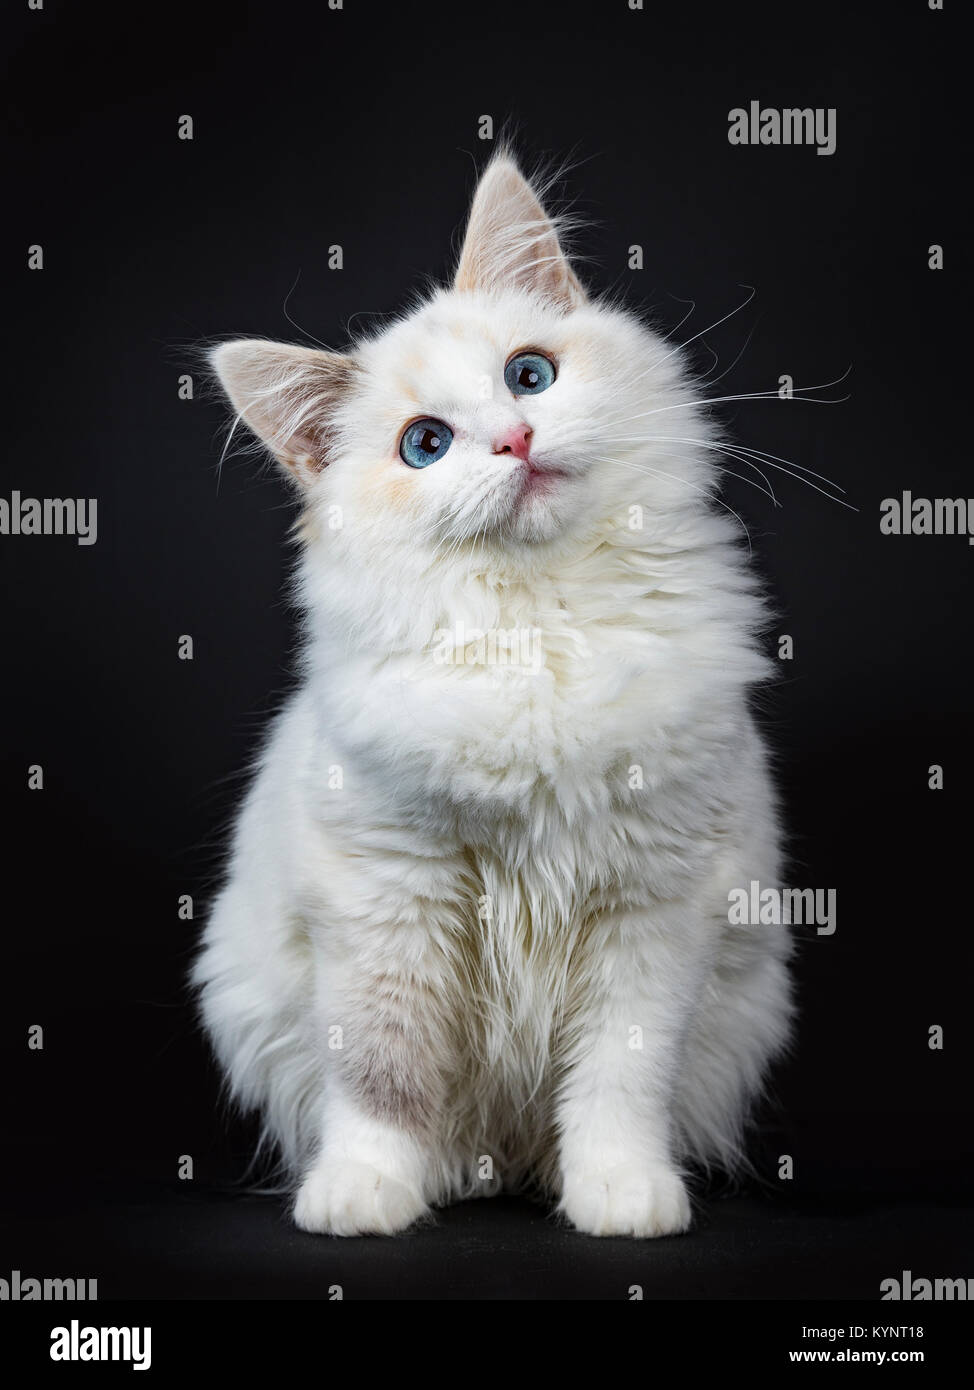 Blue eyed ragdoll cat / kitten sitting isolated on black background looking up with tilted head Stock Photo